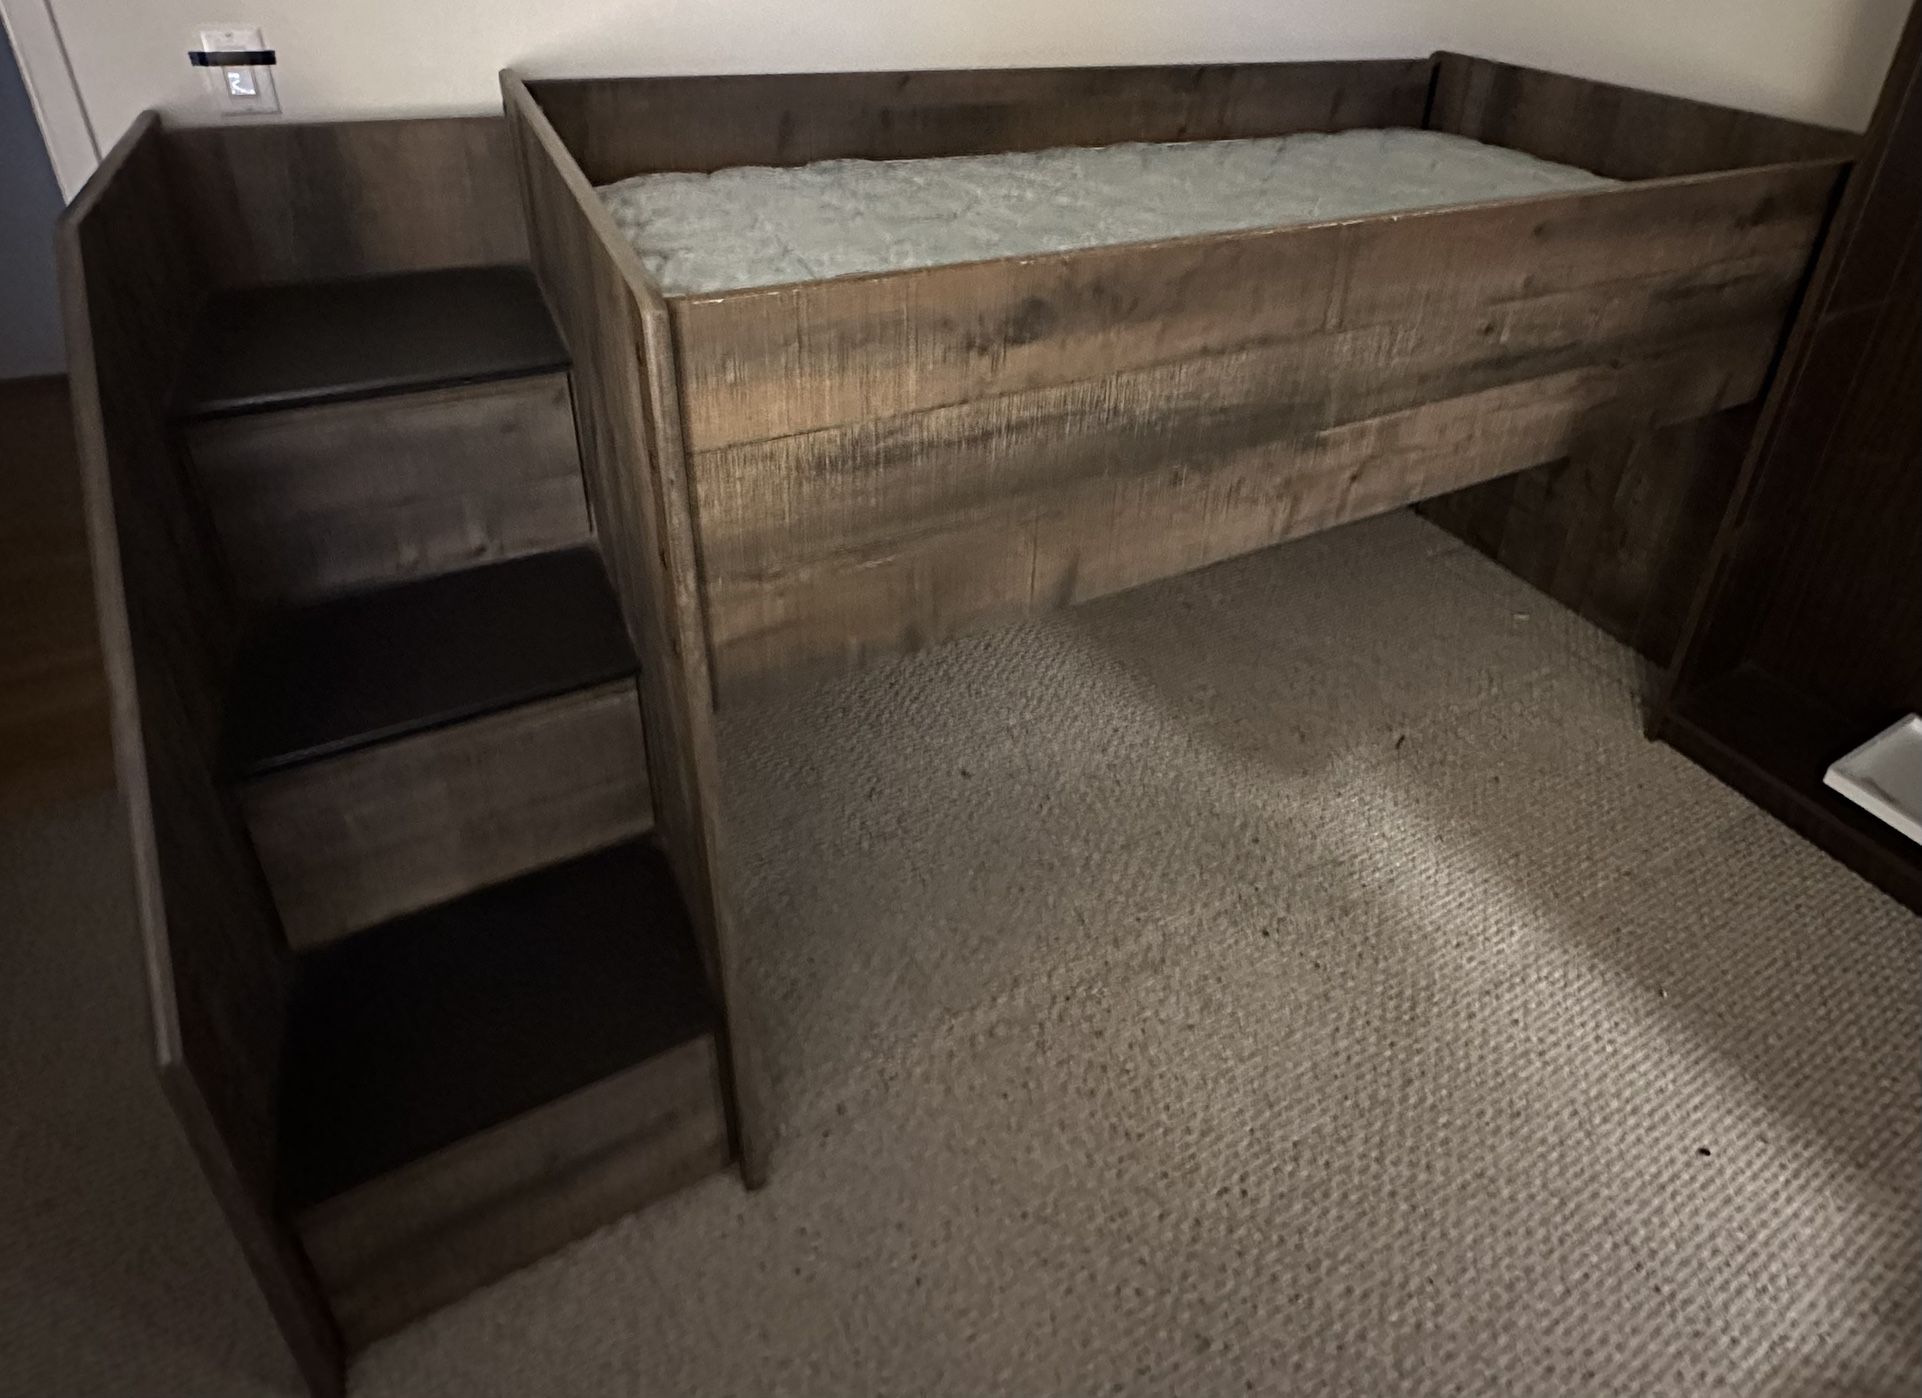 Rustic Bunk Bed twin size frame with drawer